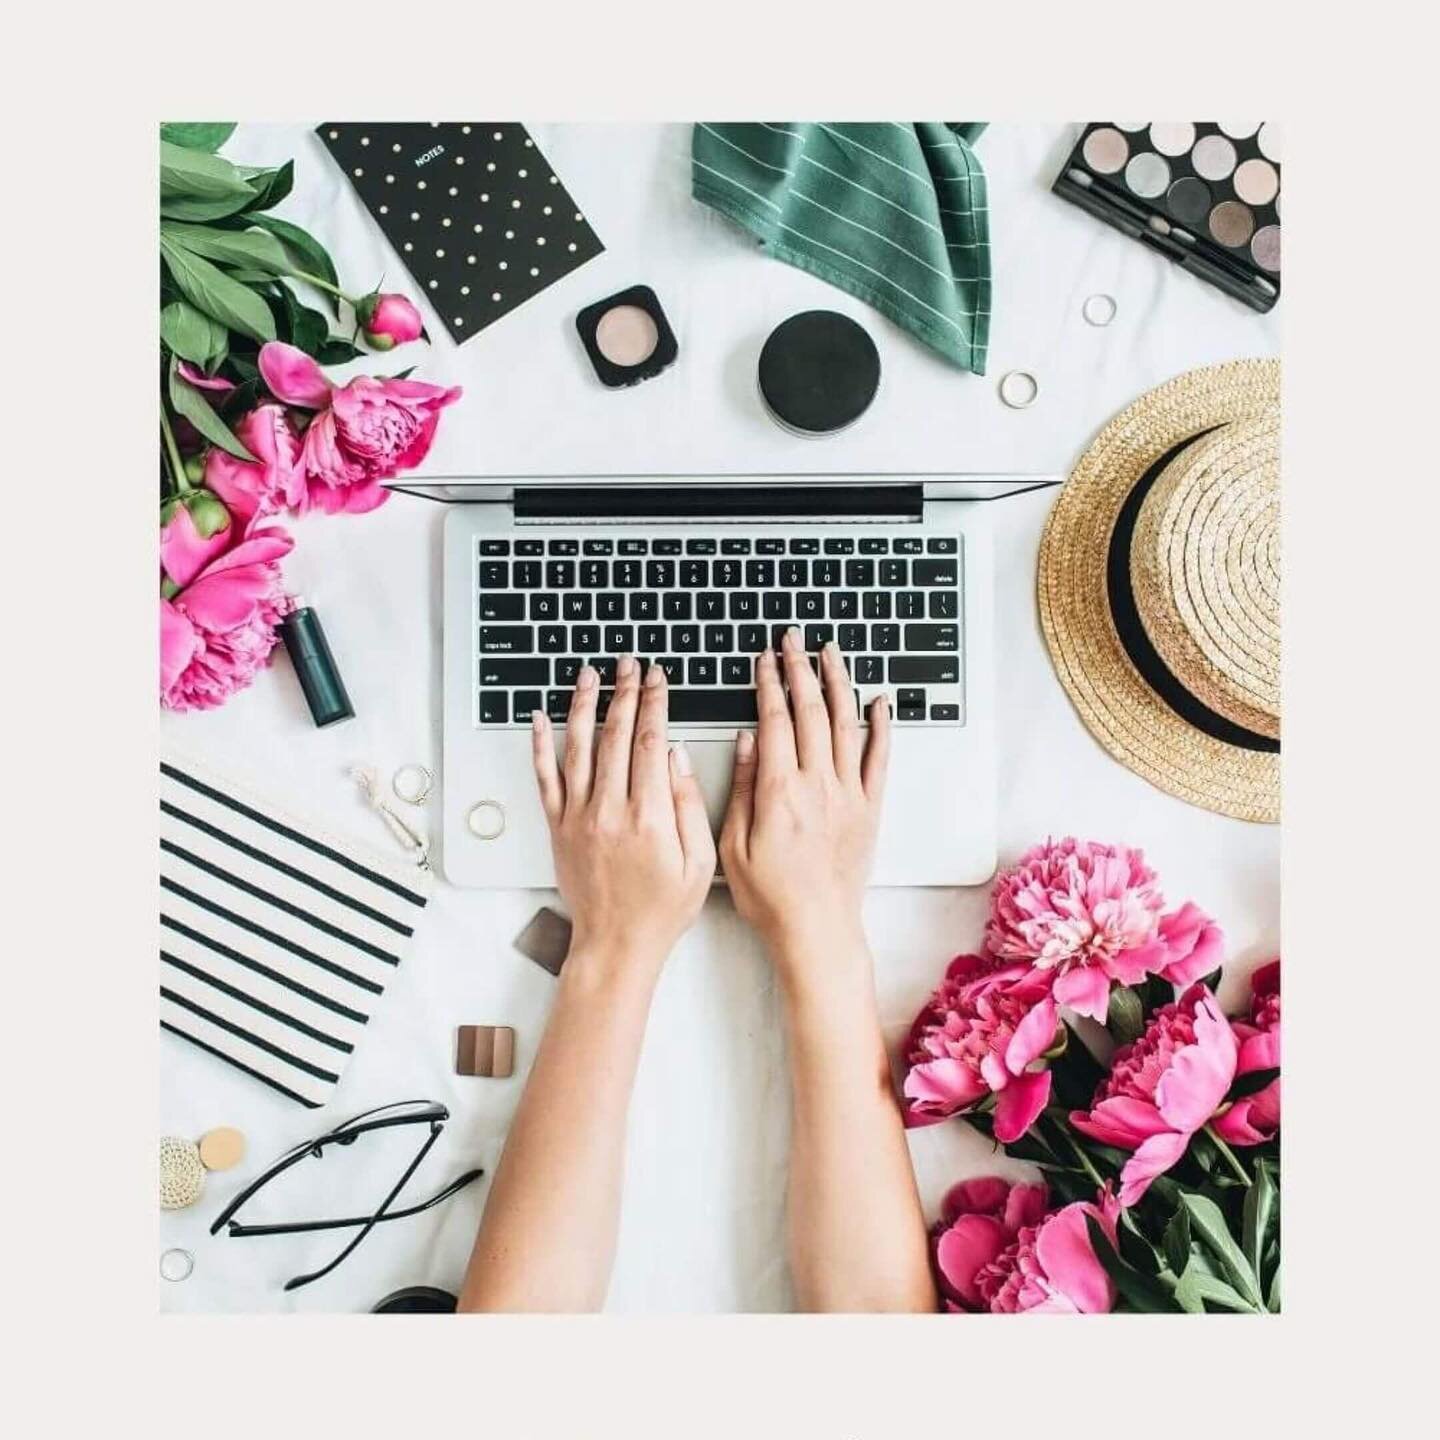 Welcome to this week&rsquo;s Wonderful Wednesday Blog Hop&hellip; Today&rsquo;s Editor&rsquo;s Choice &gt; Blogging For Business: Strategies For Success from @how_to_get_organized_at_home&hellip; Wonderful feature, Sharon!
&nbsp;
⭐️ Check out all of 